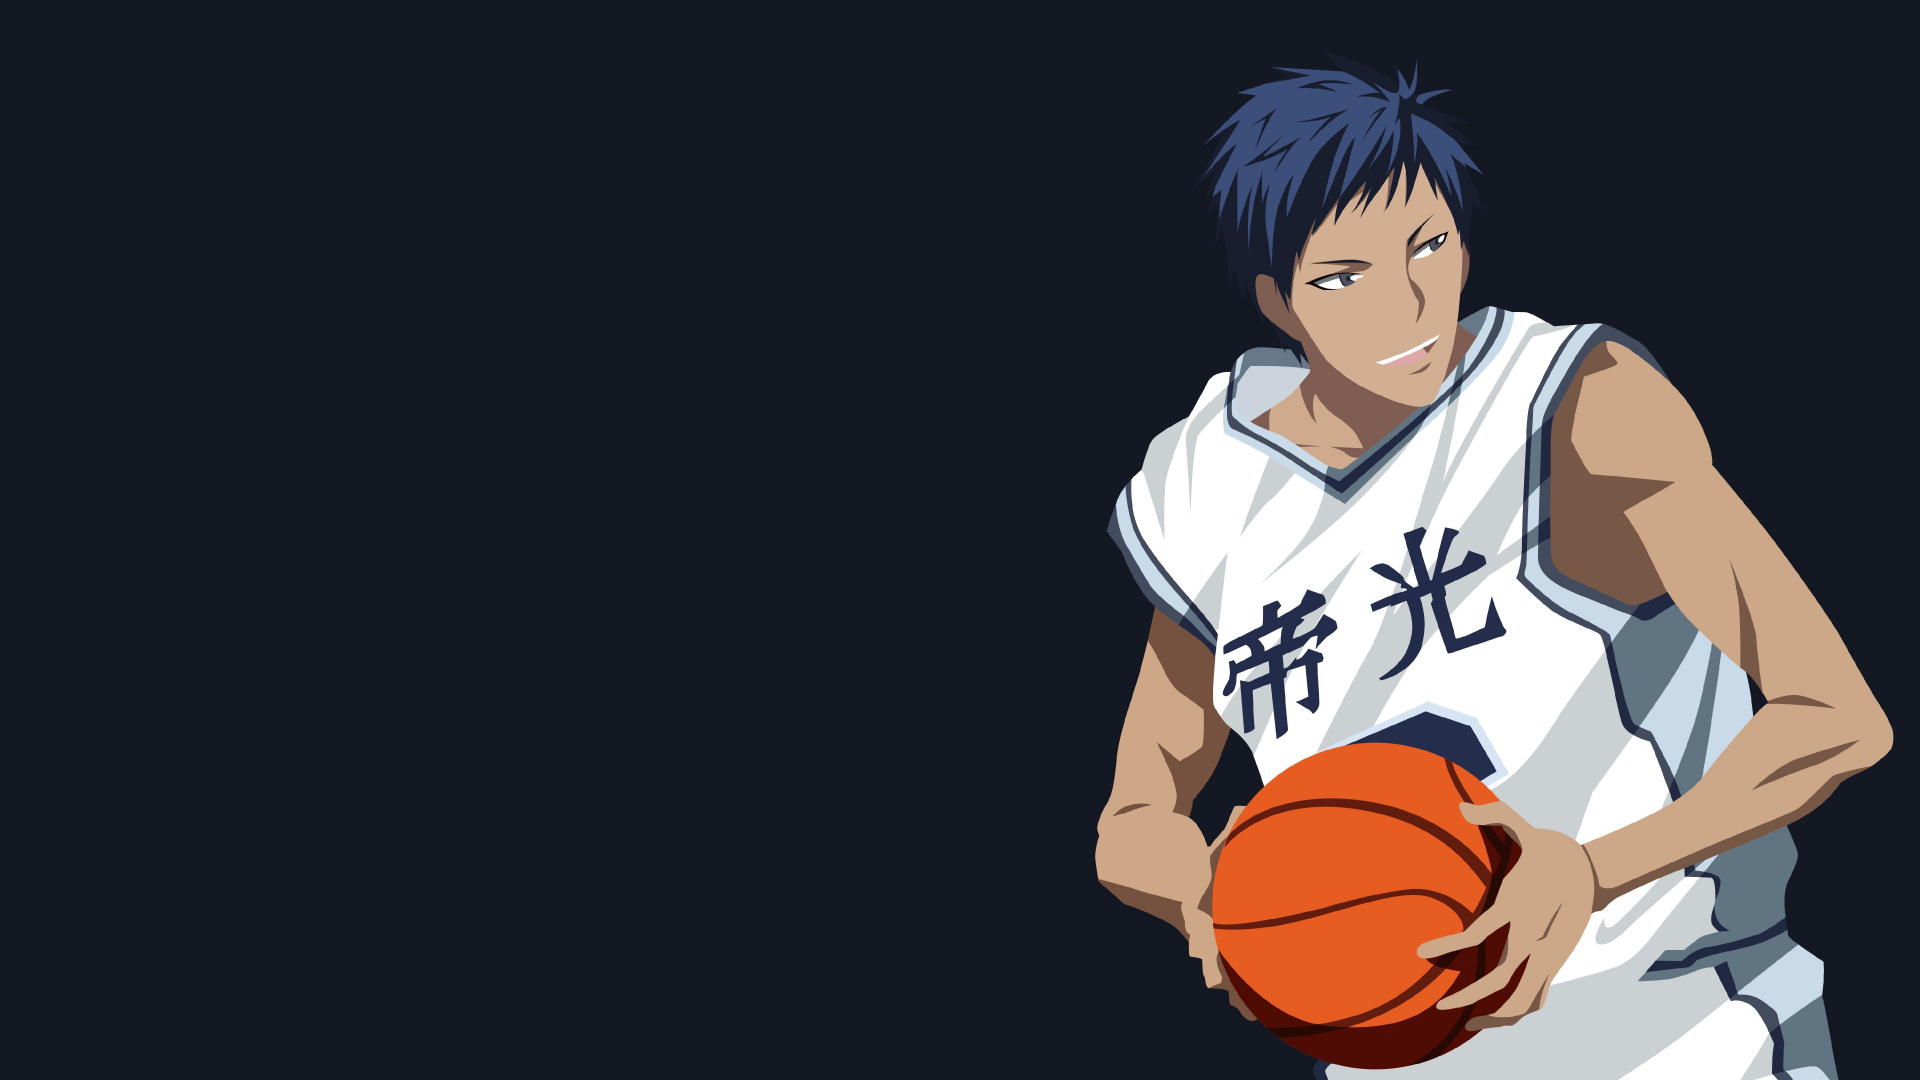 Personnage D'anime Masculin Aux Cheveux Noirs Tenant le Basket-ball. Wallpaper in 1920x1080 Resolution